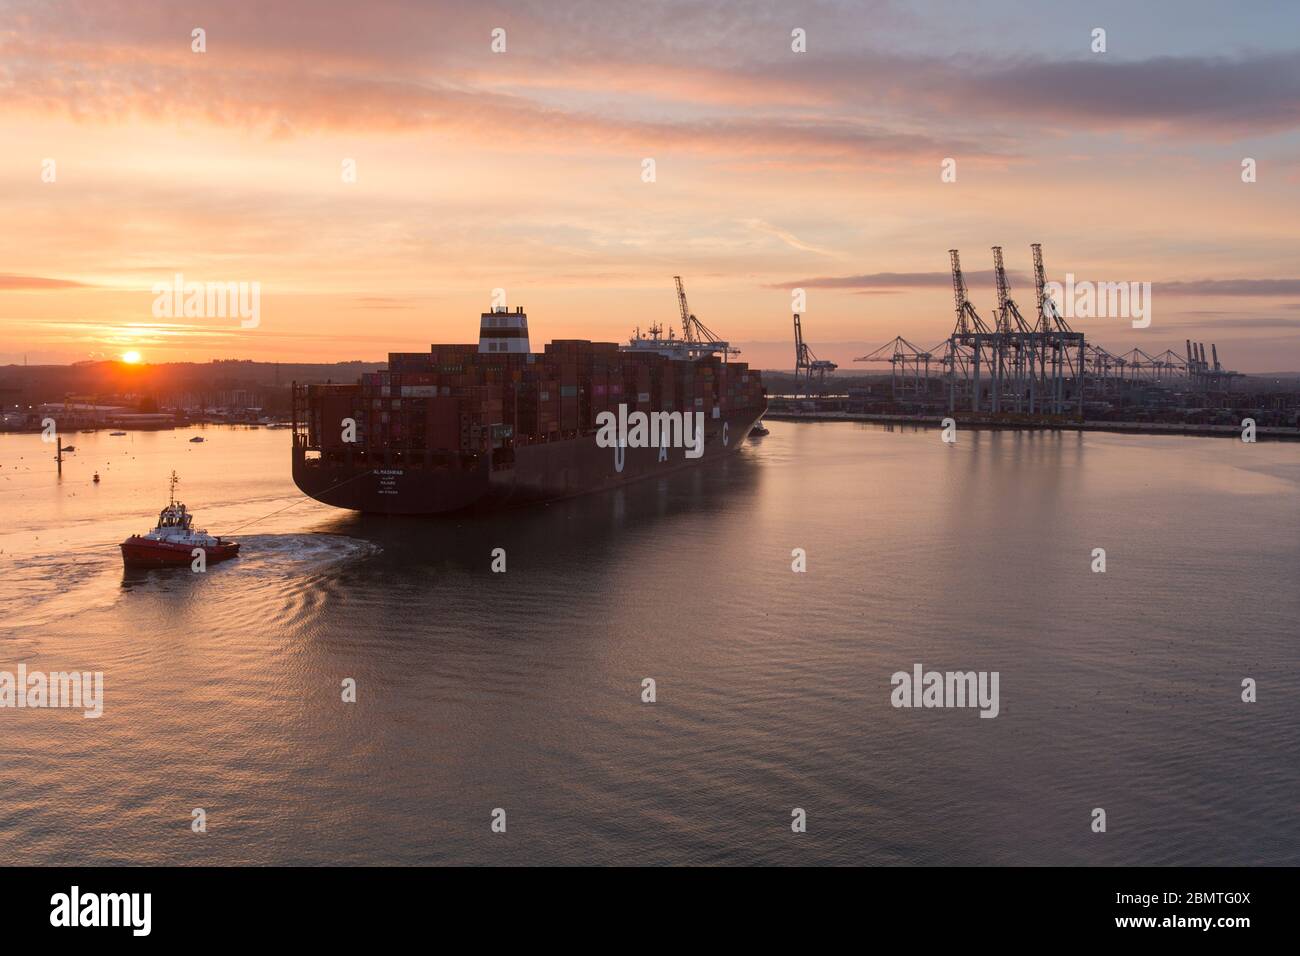 City of Southampton, England. Picturesque sunset view of a container ship navigating the River Test at Southampton Docks. Stock Photo